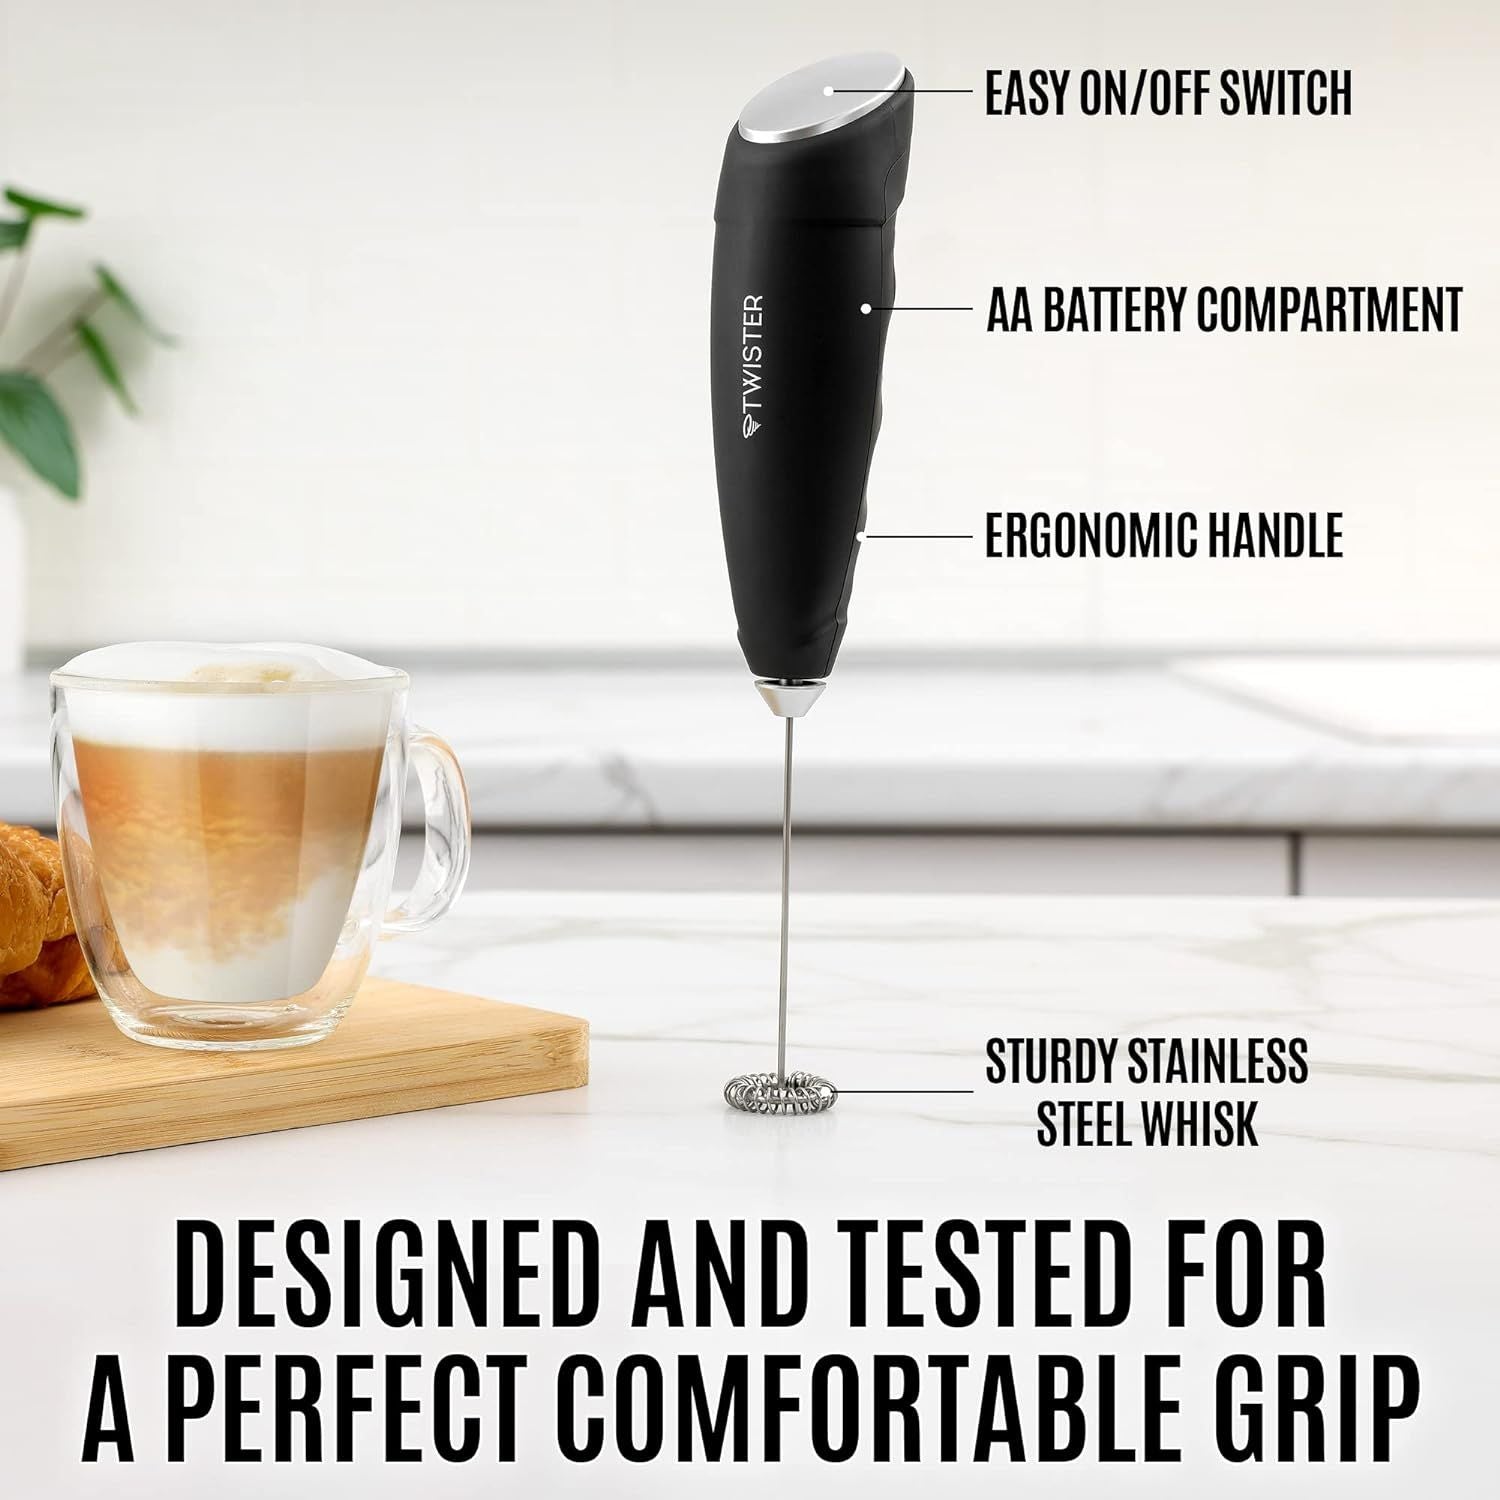 Zulay Powerful Milk Frother Handheld Foam Maker for Lattes - Whisk